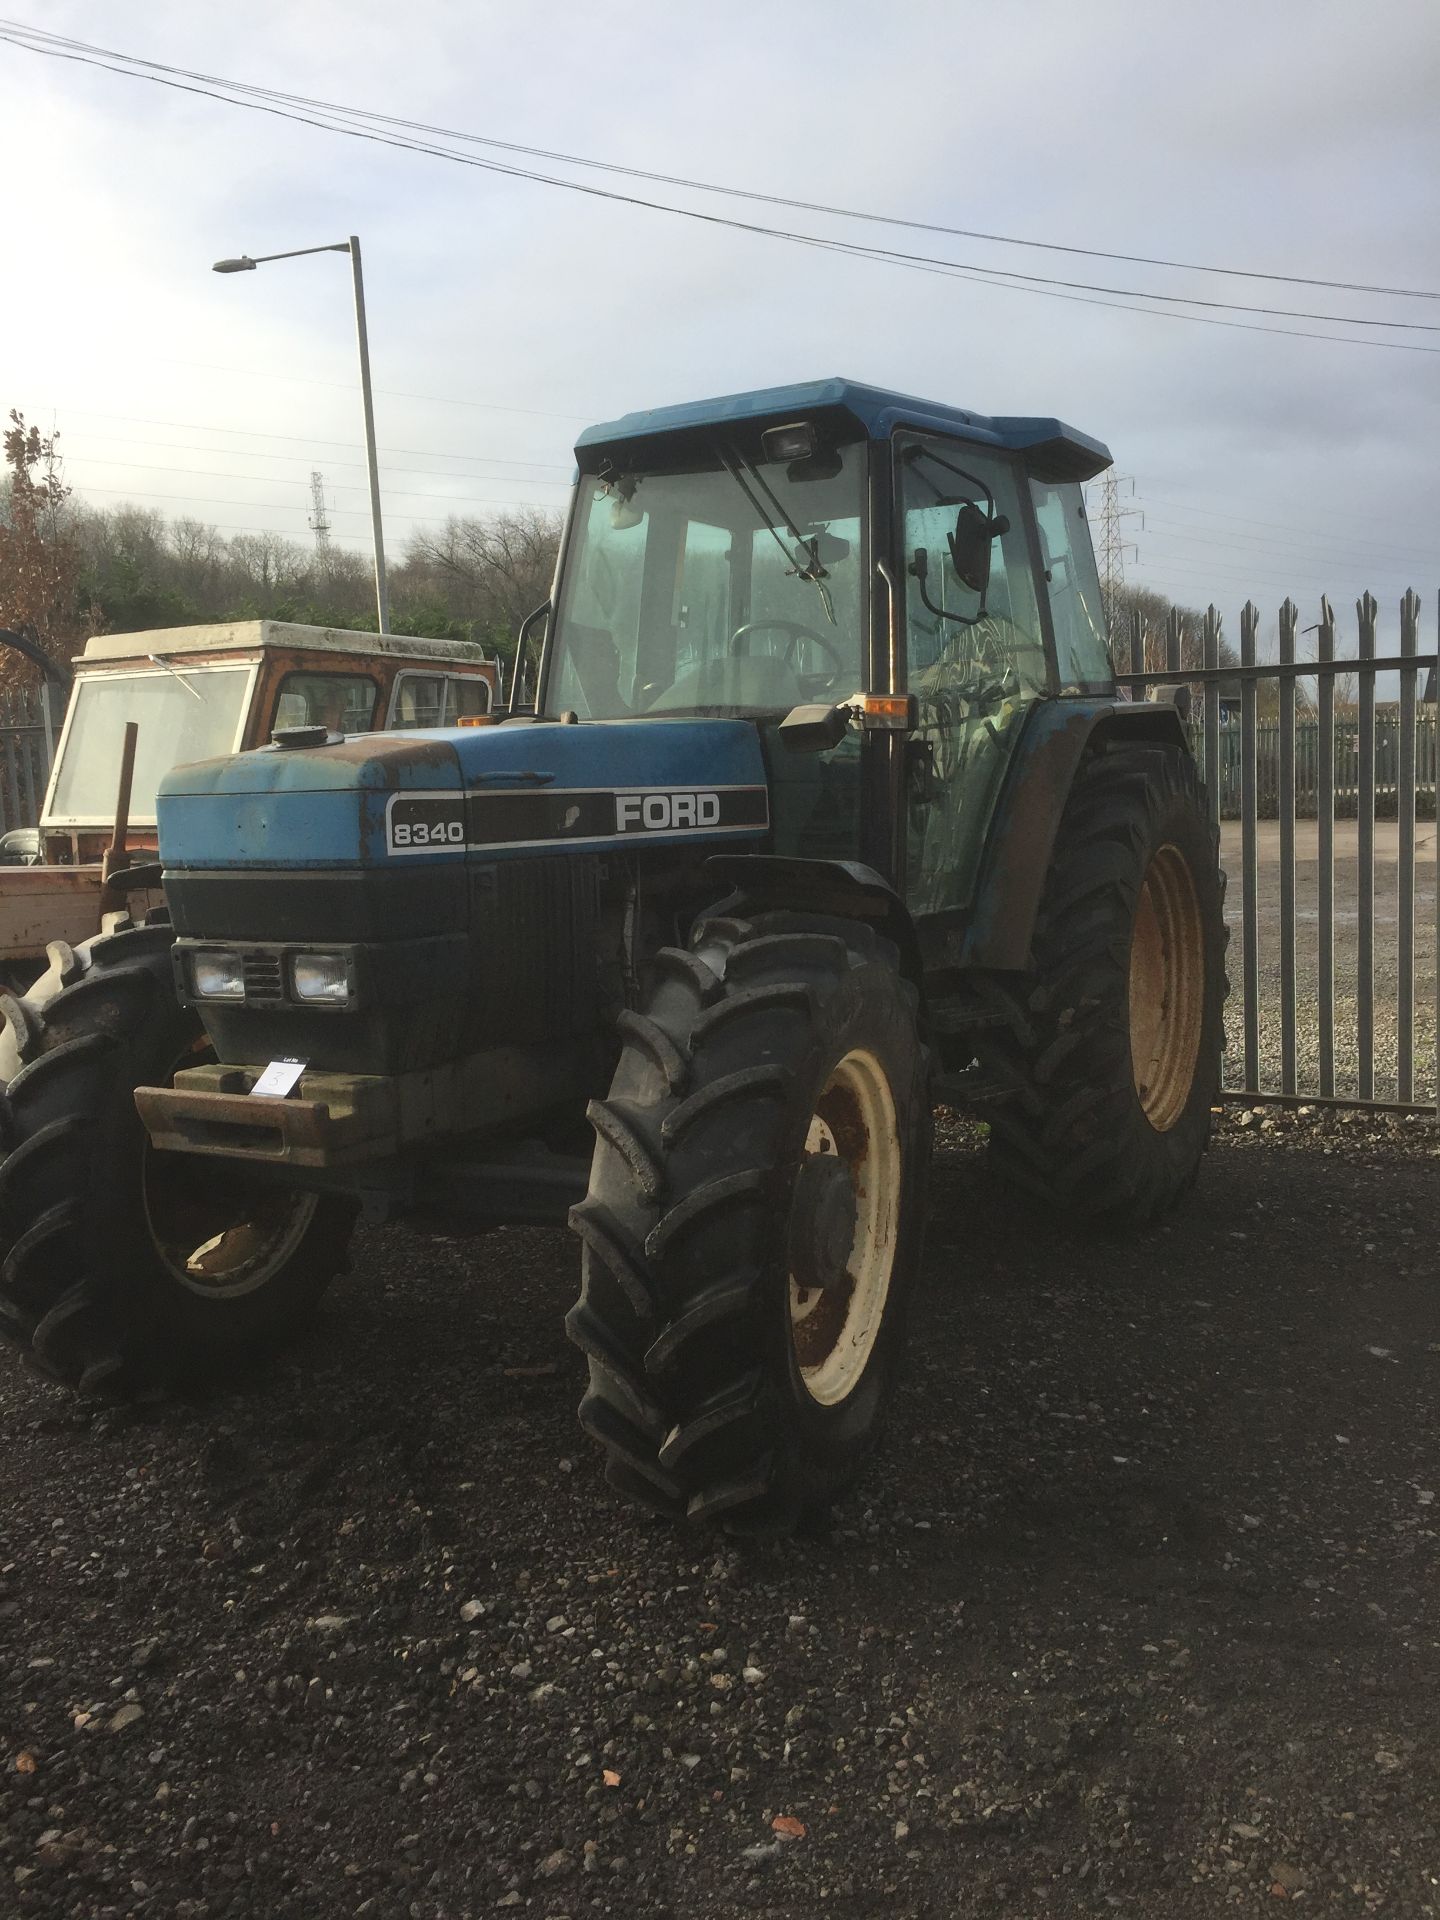 New Holland 8340 4wd tractor, Registration No. N367 NAD Hours: 1752 (not verified) - Bild 2 aus 5